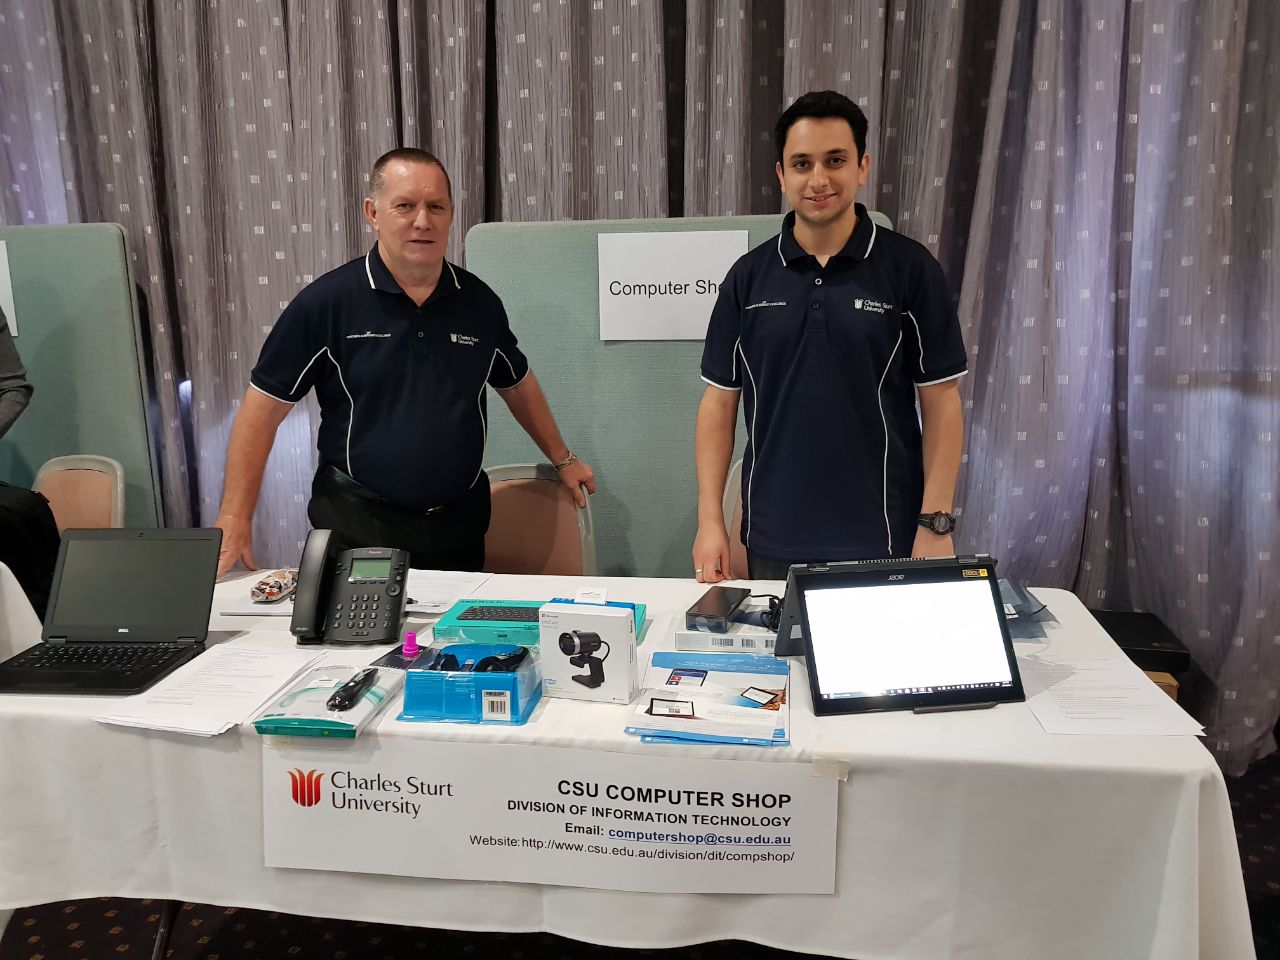 Cedric Locke and Ramin Ghorashi standing at the Computer Shop display at the Faculty of Science forum on Wagga Wagga campus